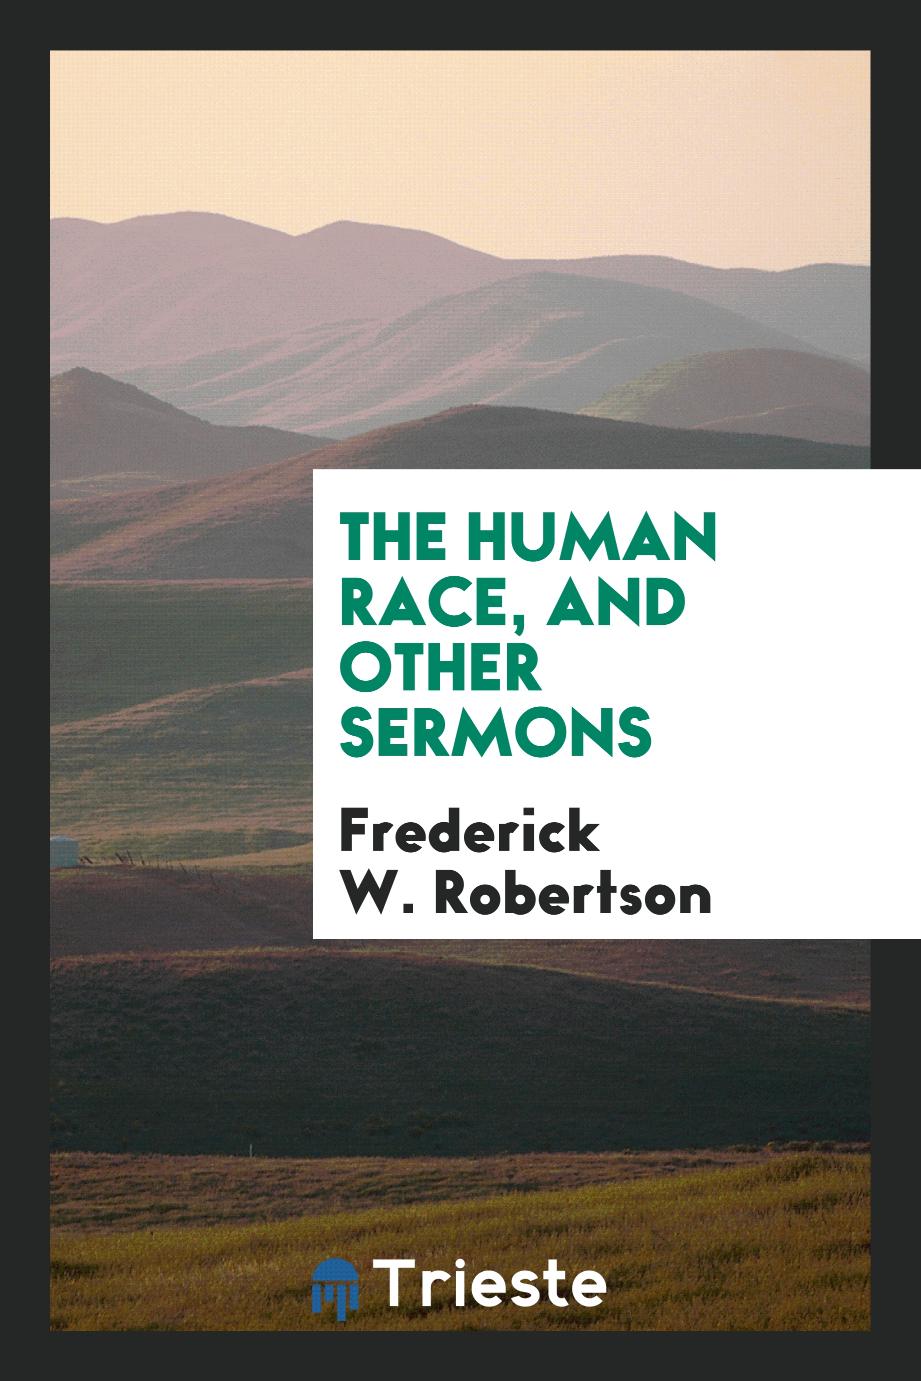 The human race, and other sermons